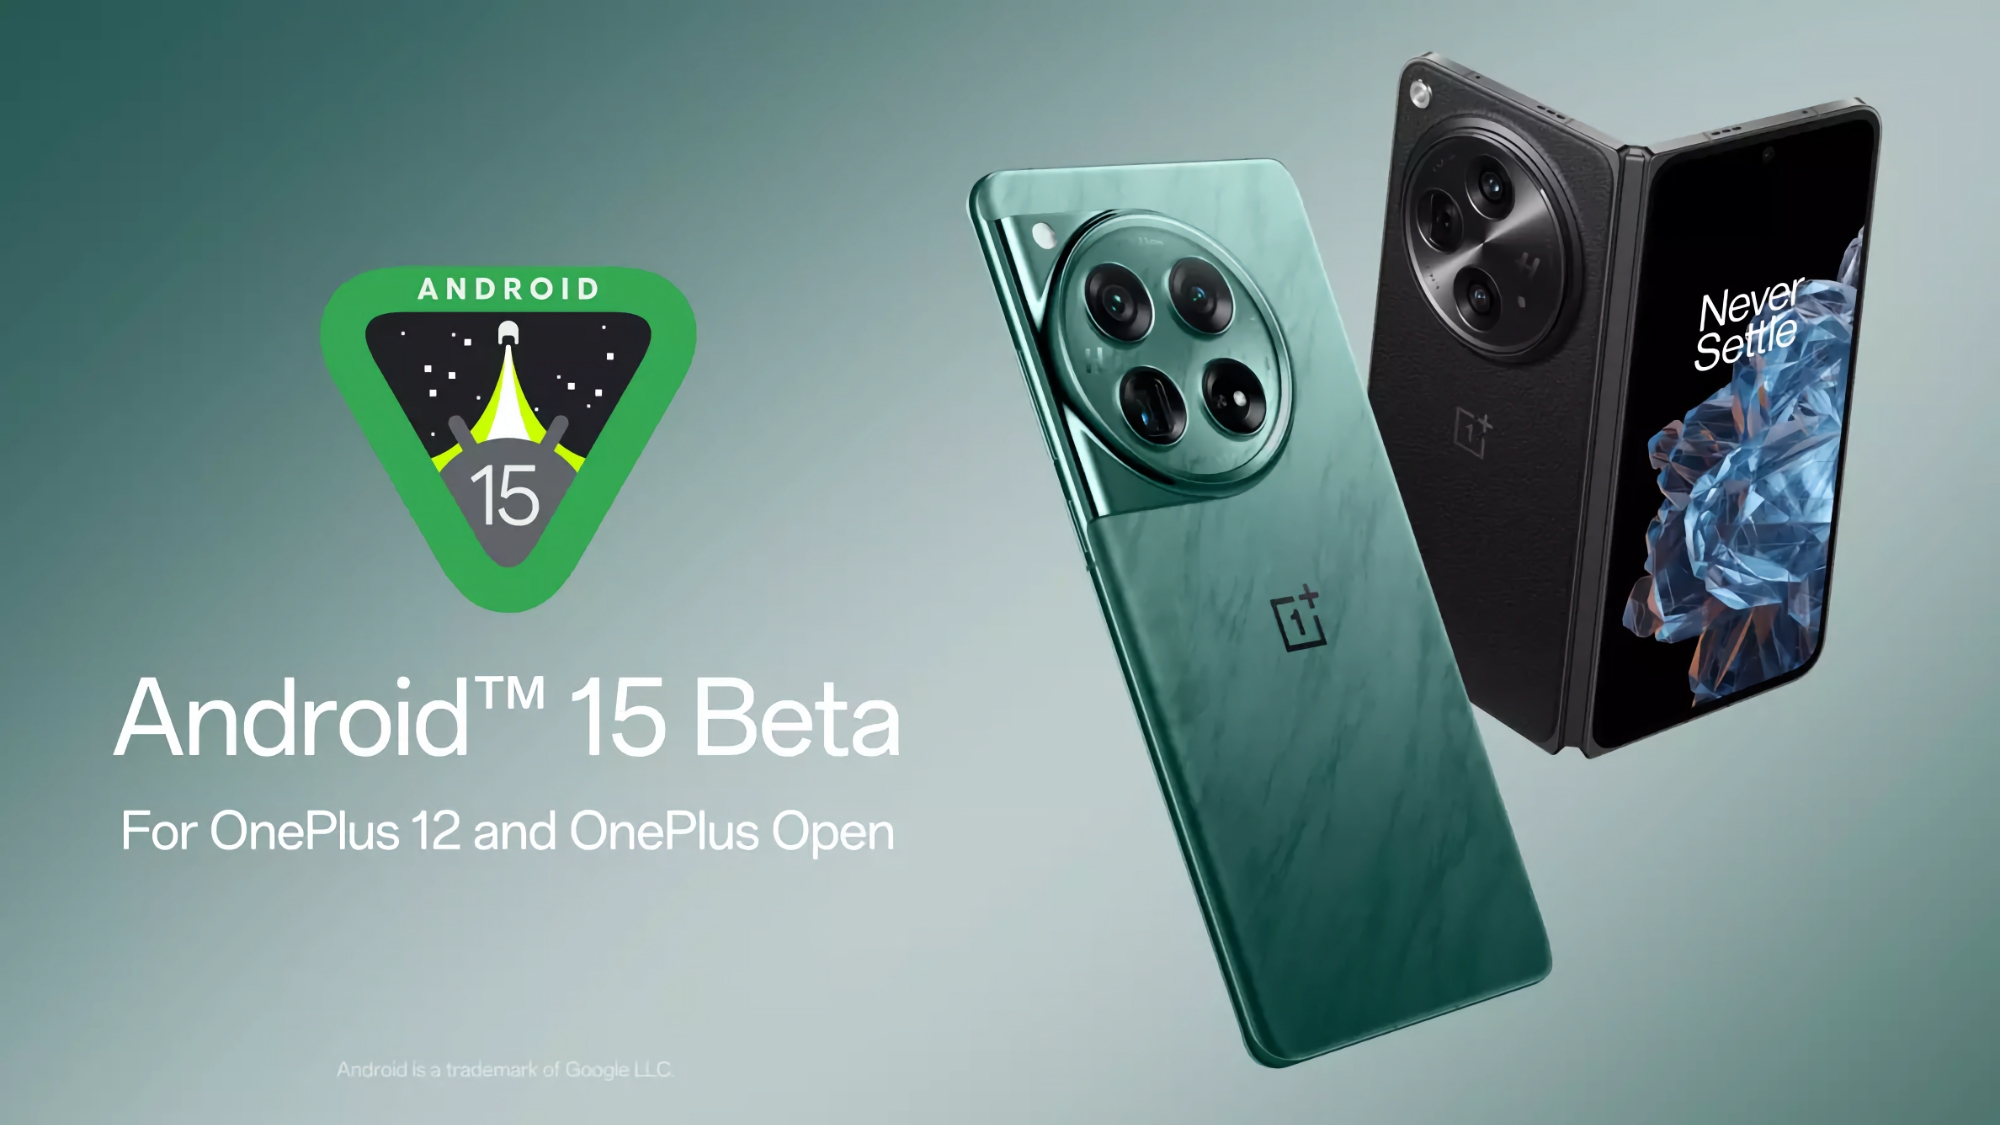 OnePlus 12 and OnePlus Open got access to Android 15 beta version